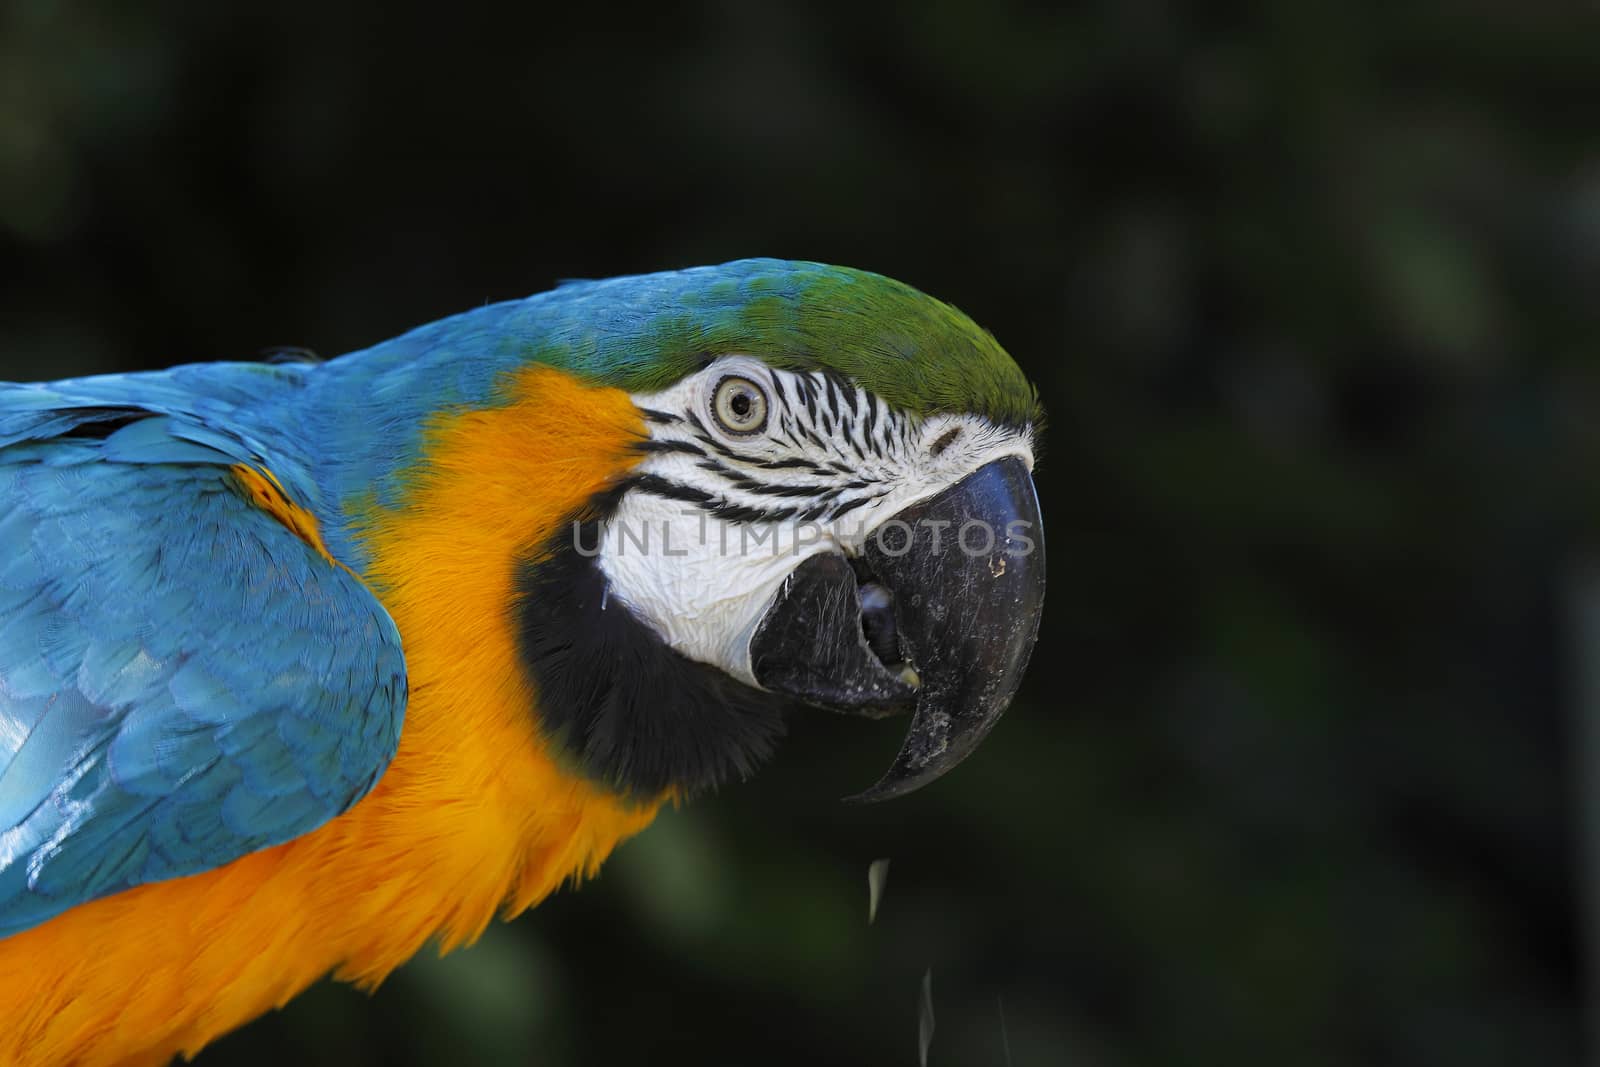 A portrait of a beautiful parrot by DigiArtFoto